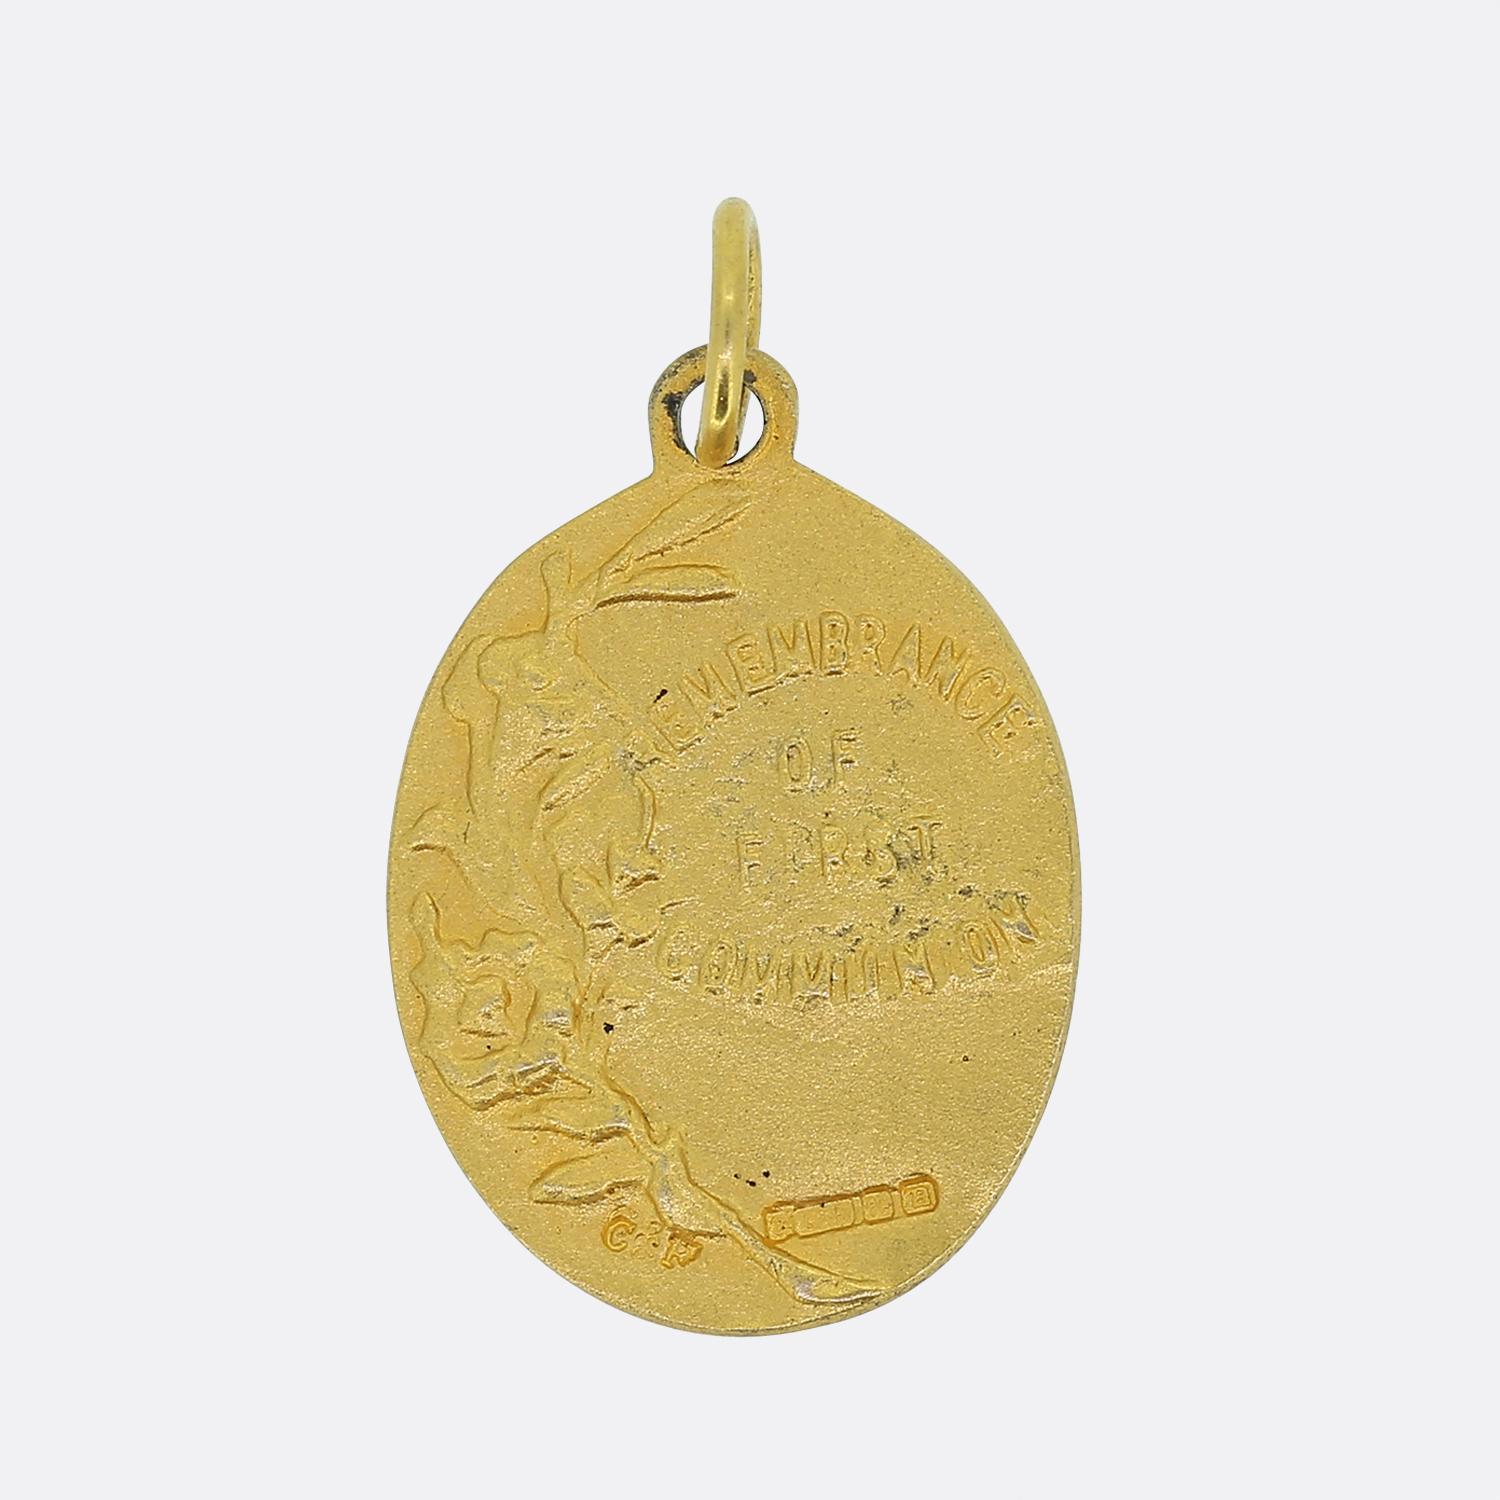 Here we have a delightful medallion pendant intended to be given as a gift as it denotes the first communion of persons life. This vintage piece has been crafted from a rich 9ct yellow gold and showcases a duo of highly detailed 3-D designs. One